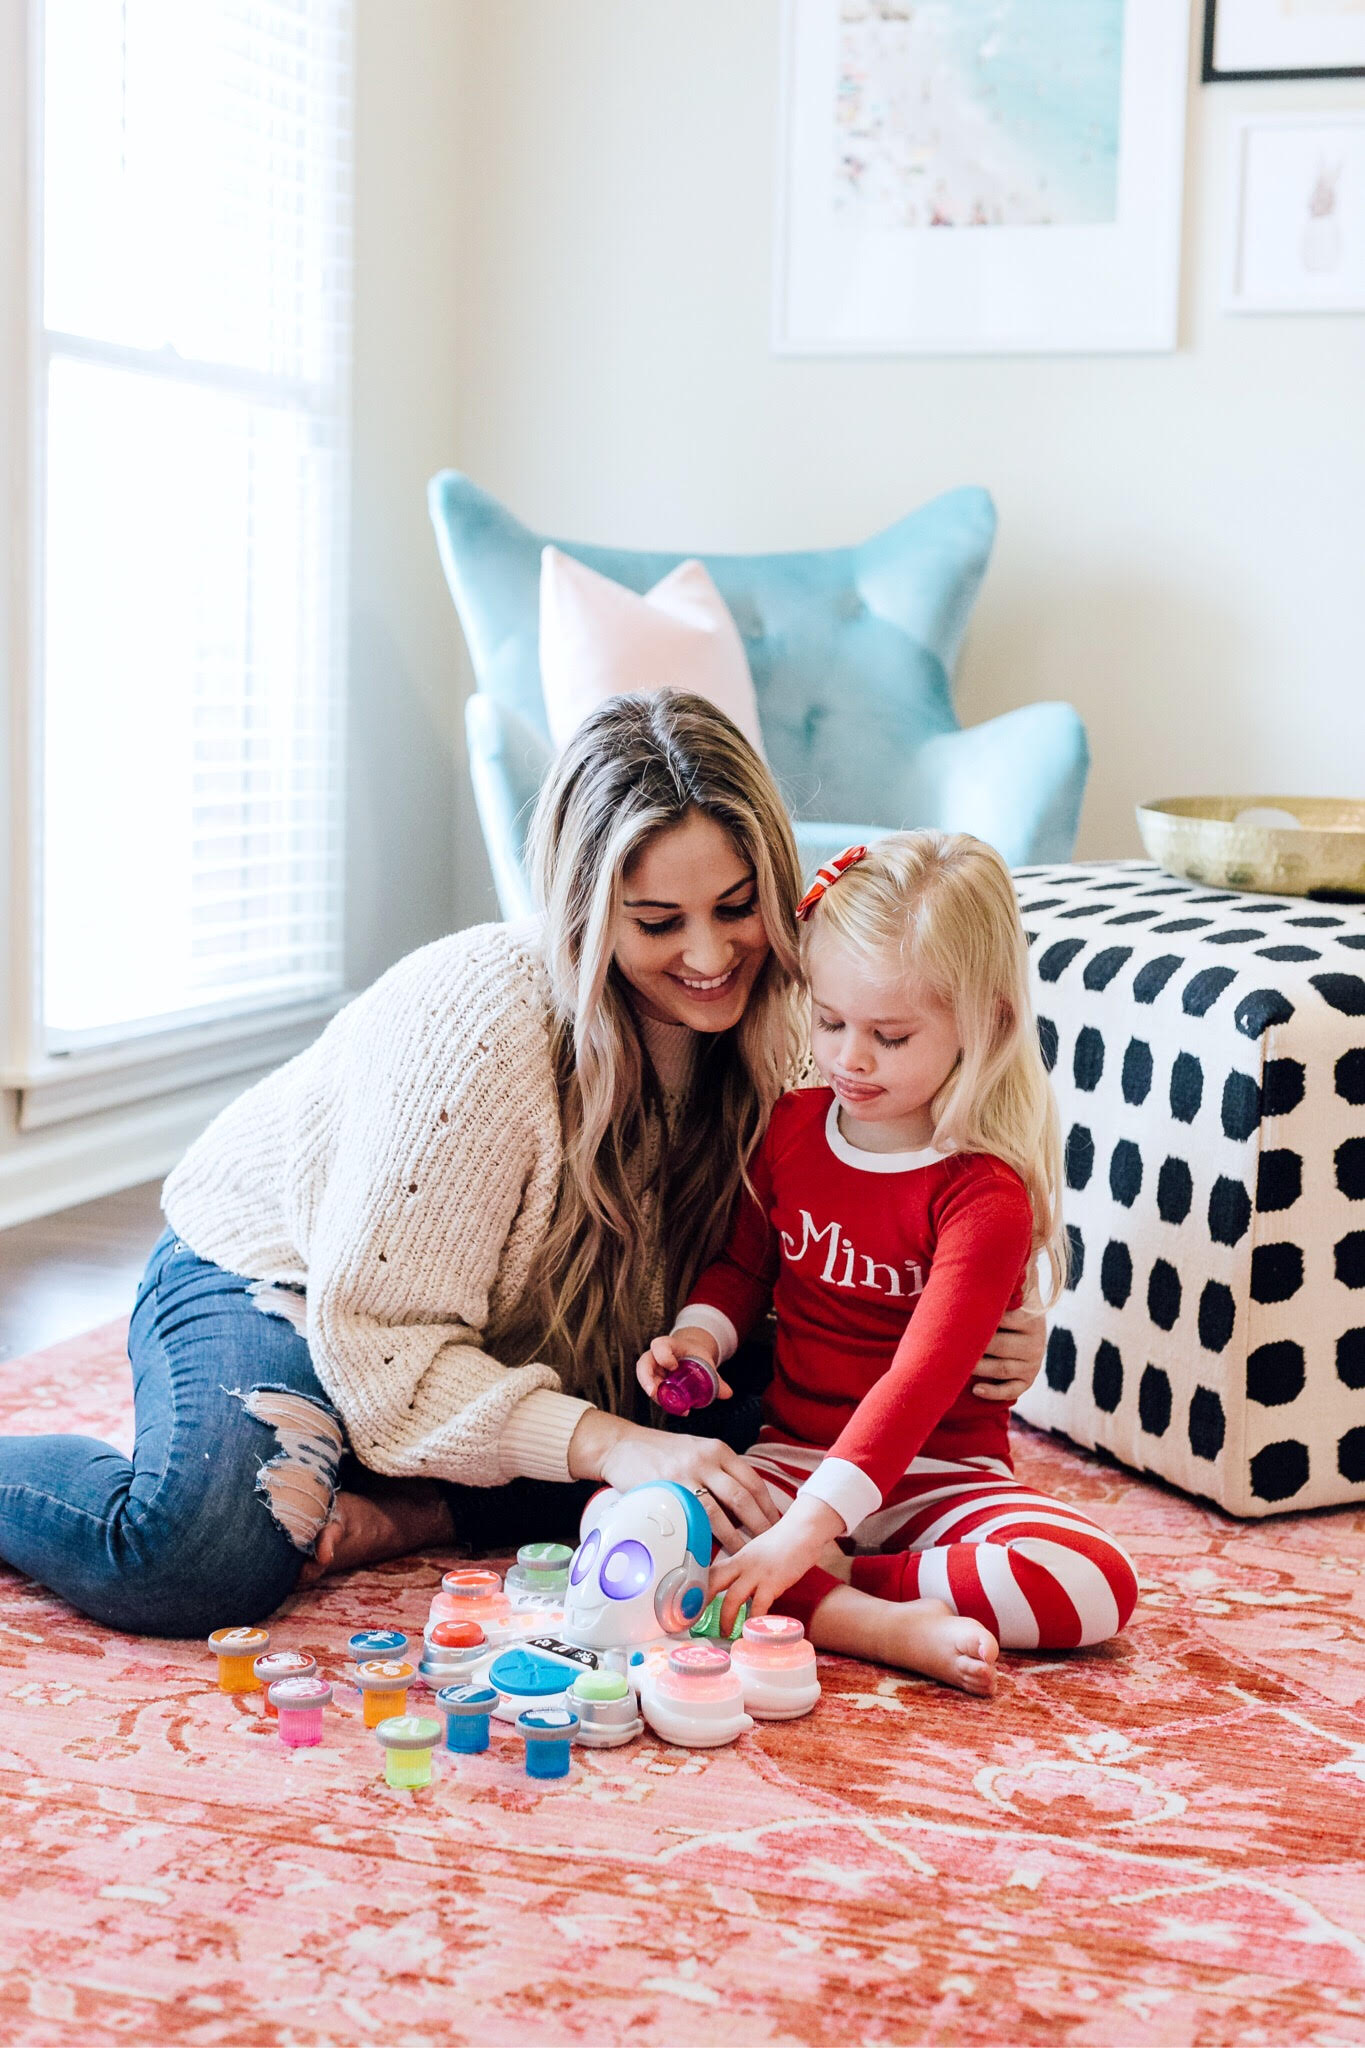 Top 10 Best Toys for Toddlers to Buy this Christmas featured by top US lifestyle blog, Walking in Memphis in High Heels: image of a mom and daughter duo playing with holiday toys